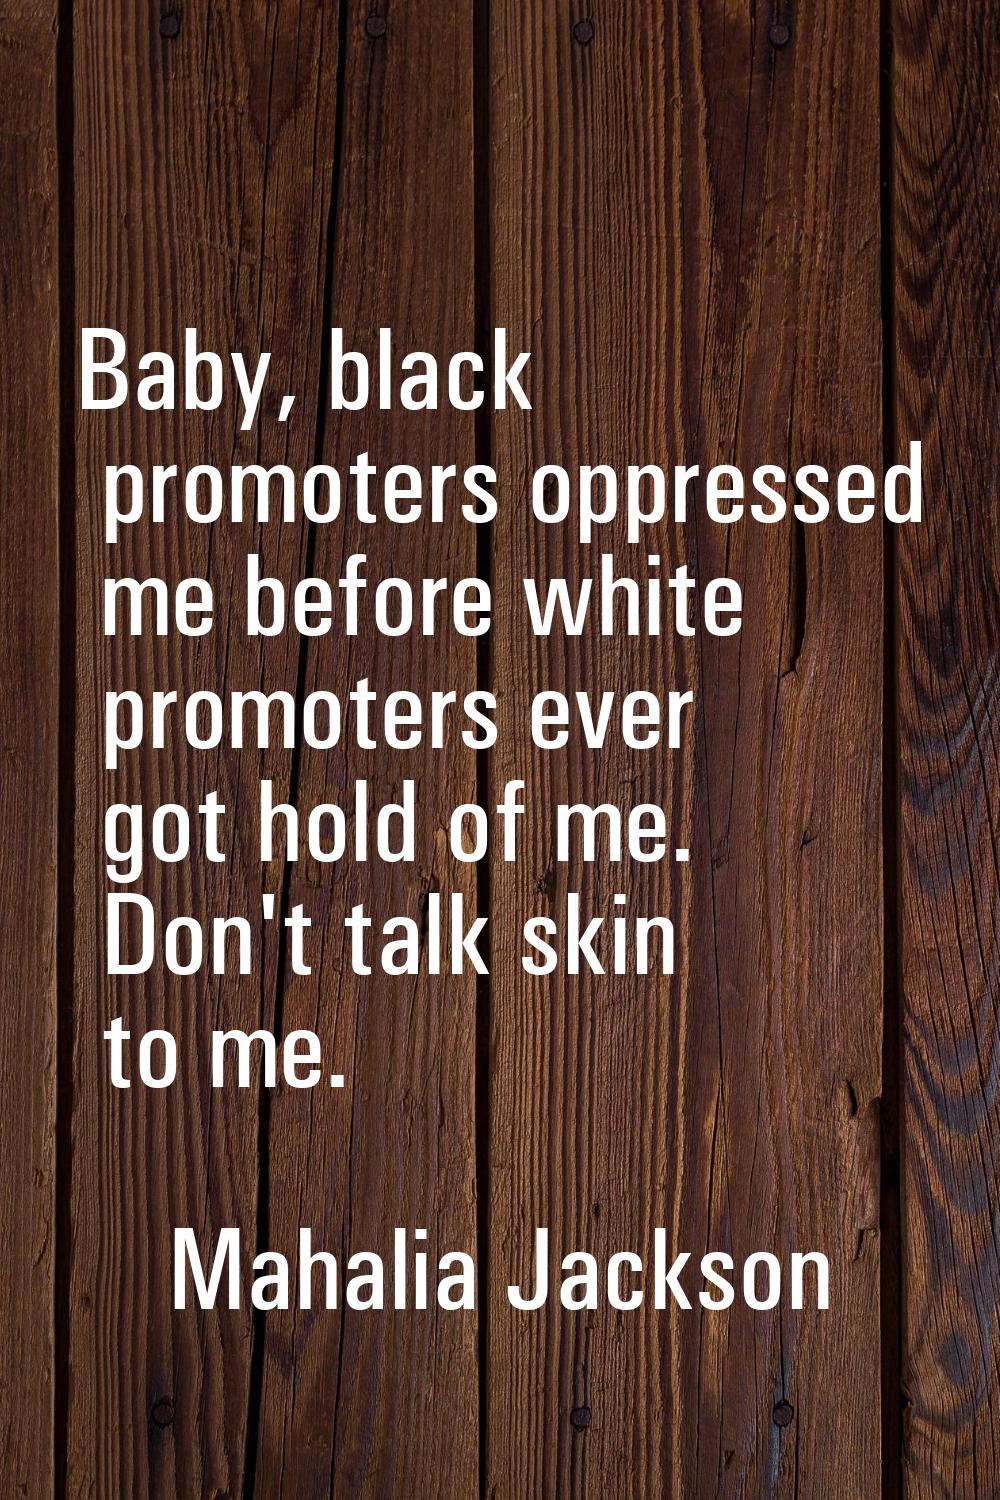 Baby, black promoters oppressed me before white promoters ever got hold of me. Don't talk skin to m